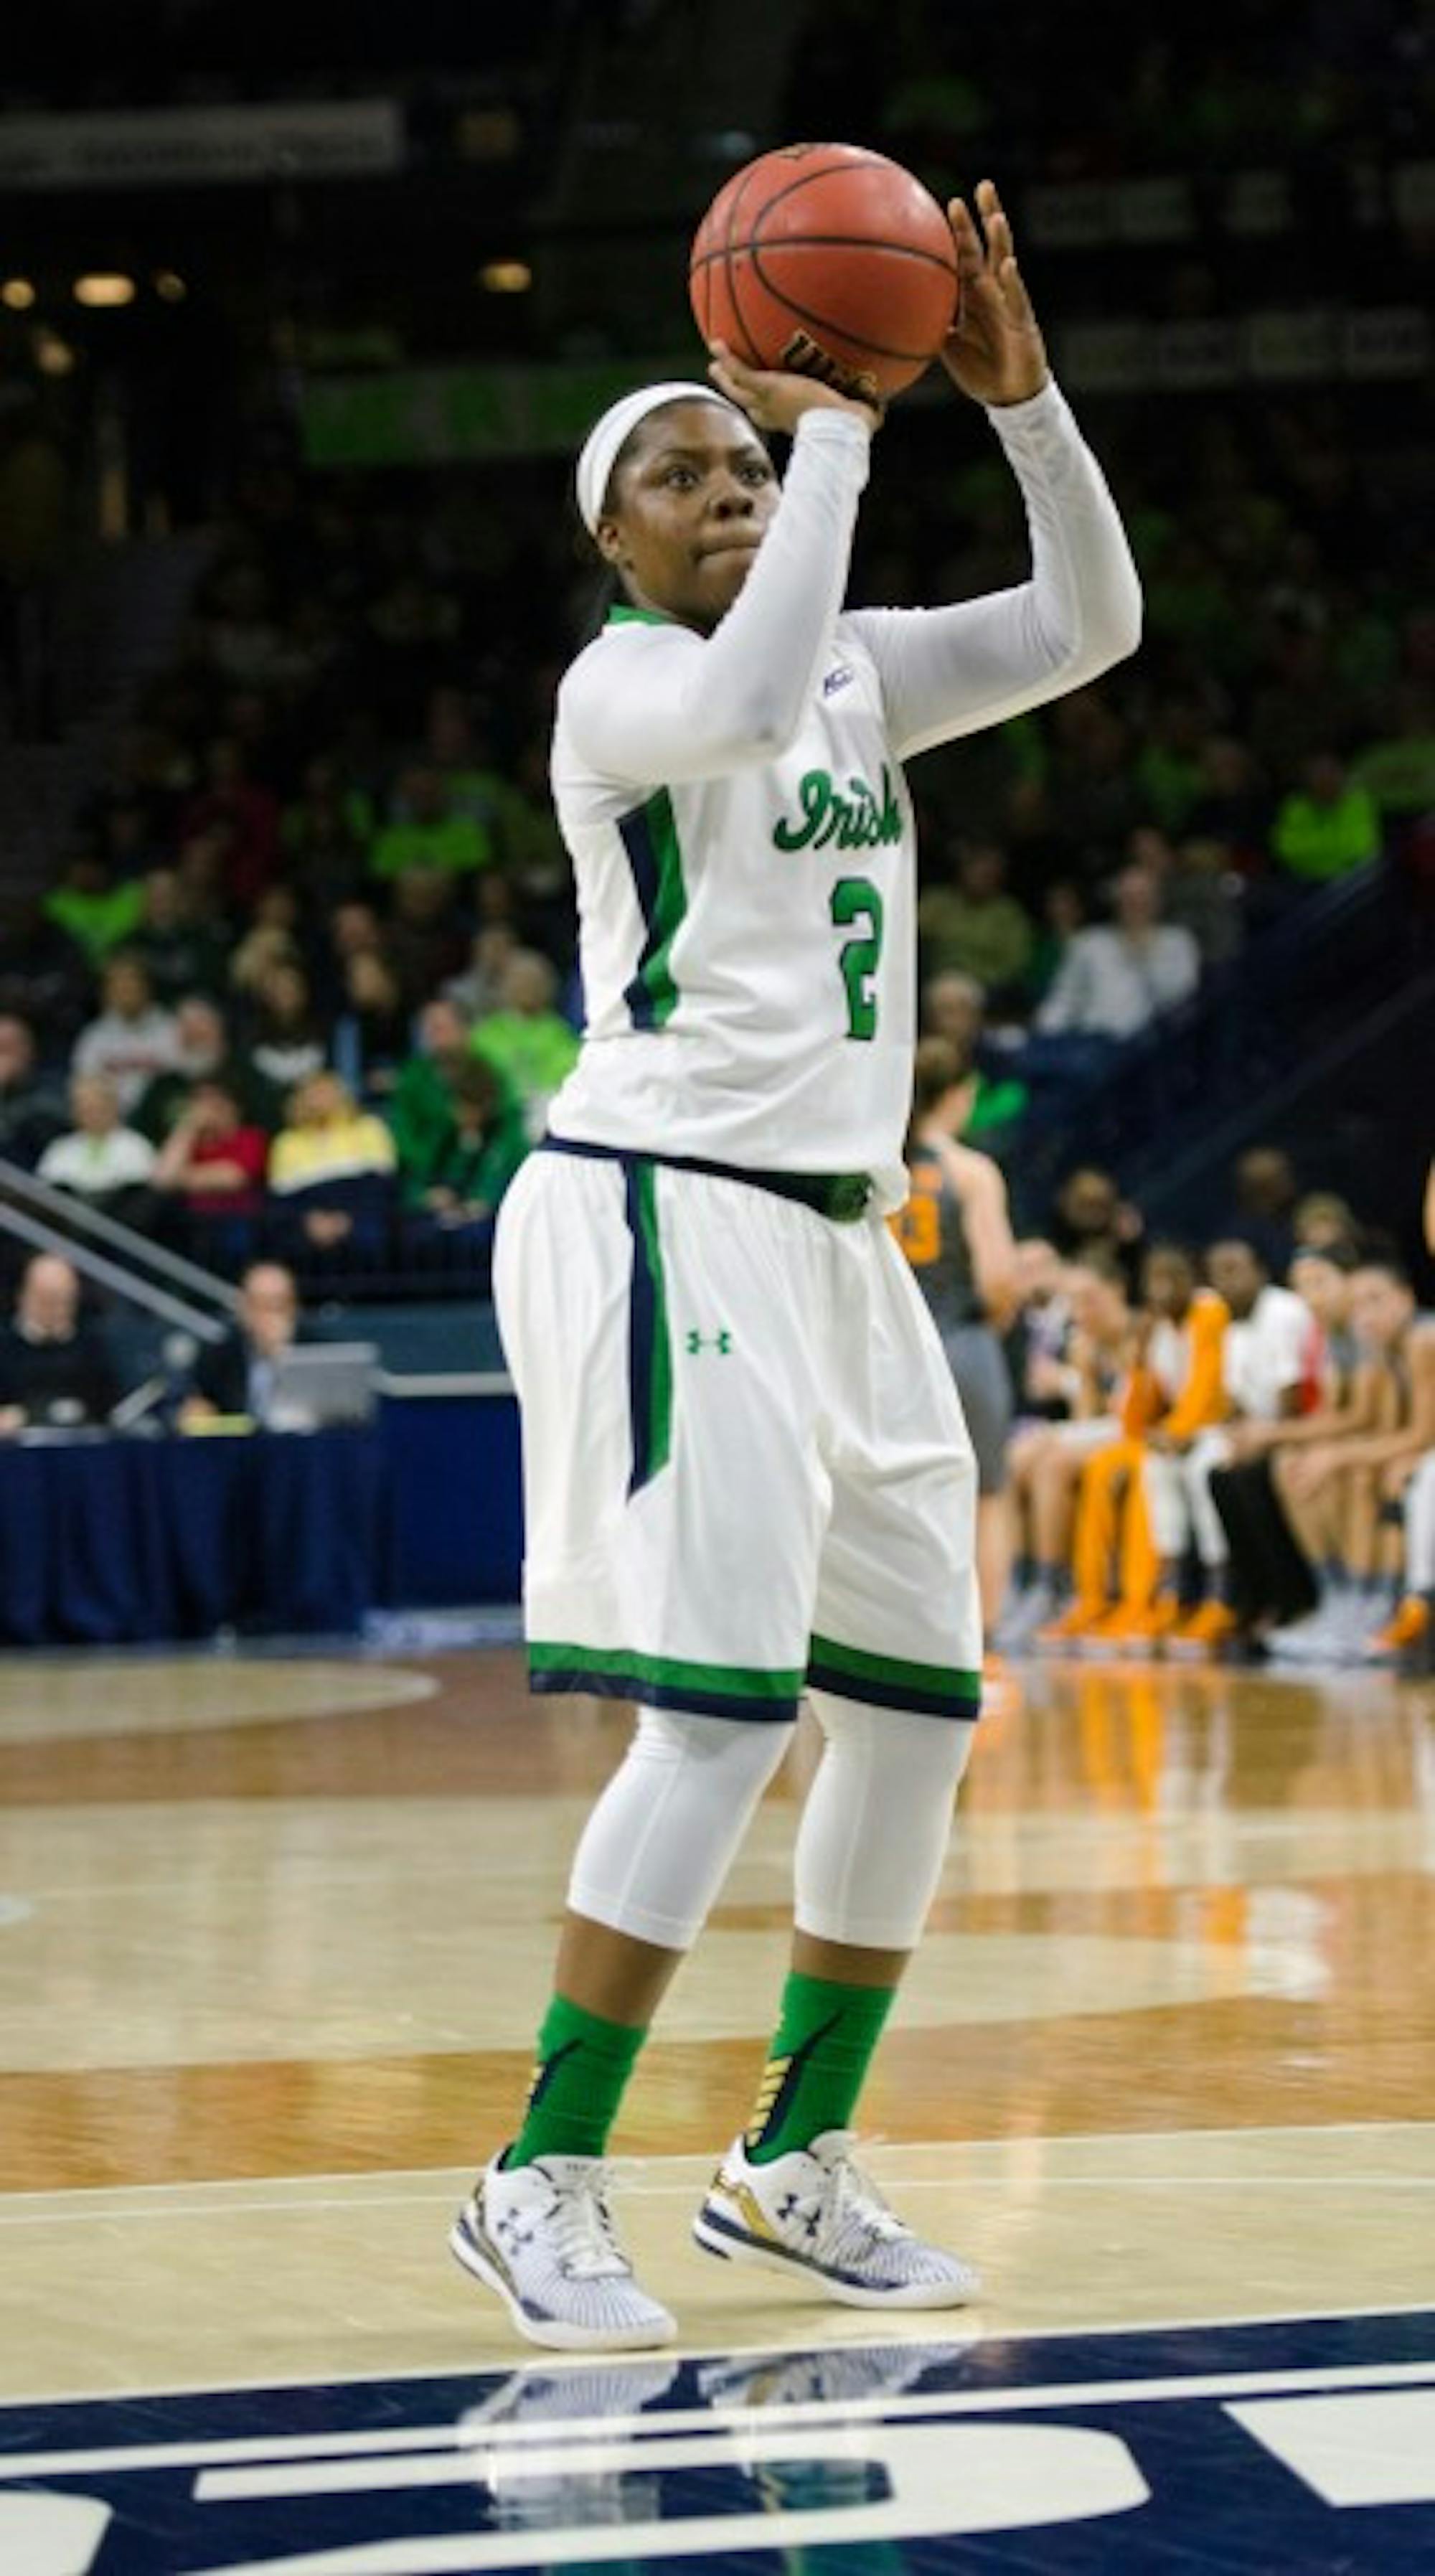 Irish freshman guard Arike Ogunbowale shoots a free throw during Notre Dame’s 79-66 win over Tennessee on Monday at Purcell Pavilion.